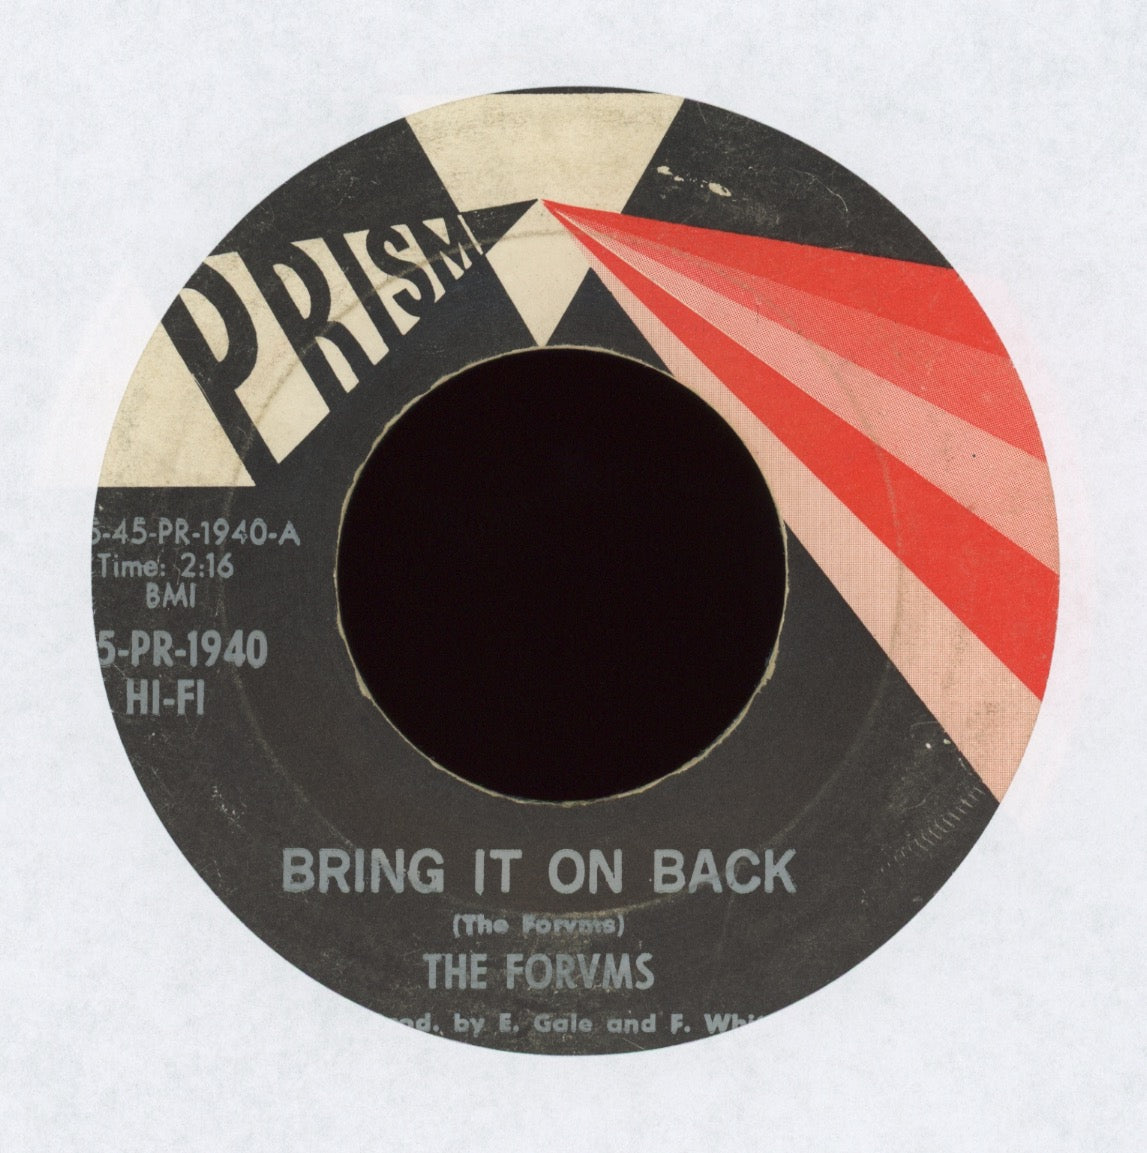 The Forvms - Bring It On Back on Prism